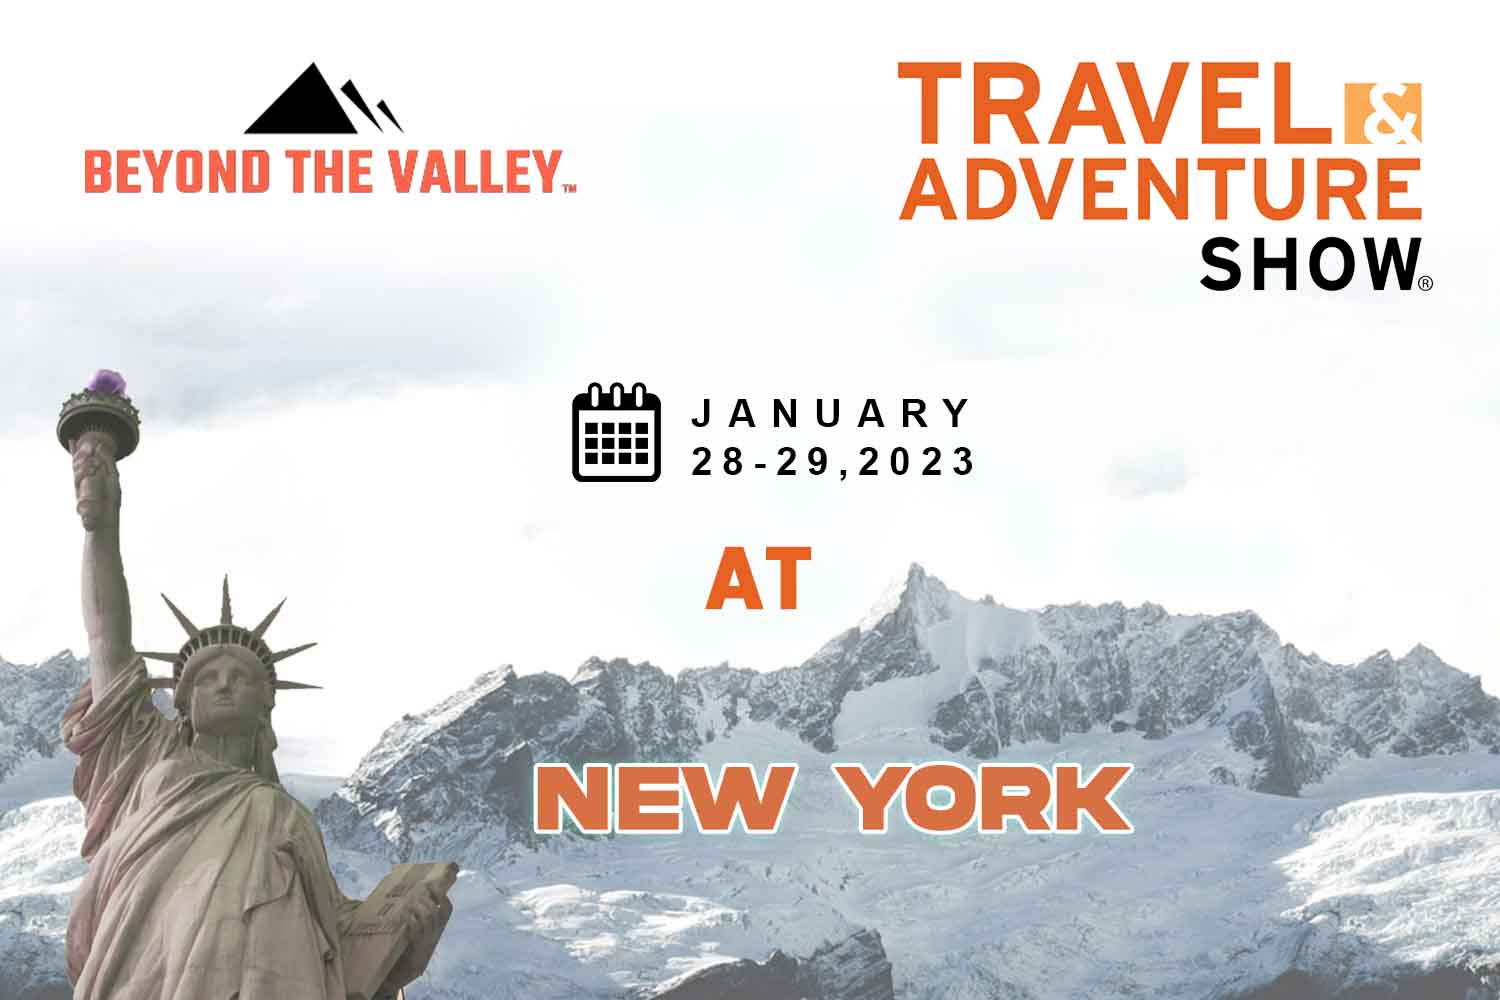 travel and adventure show 2023 schedule